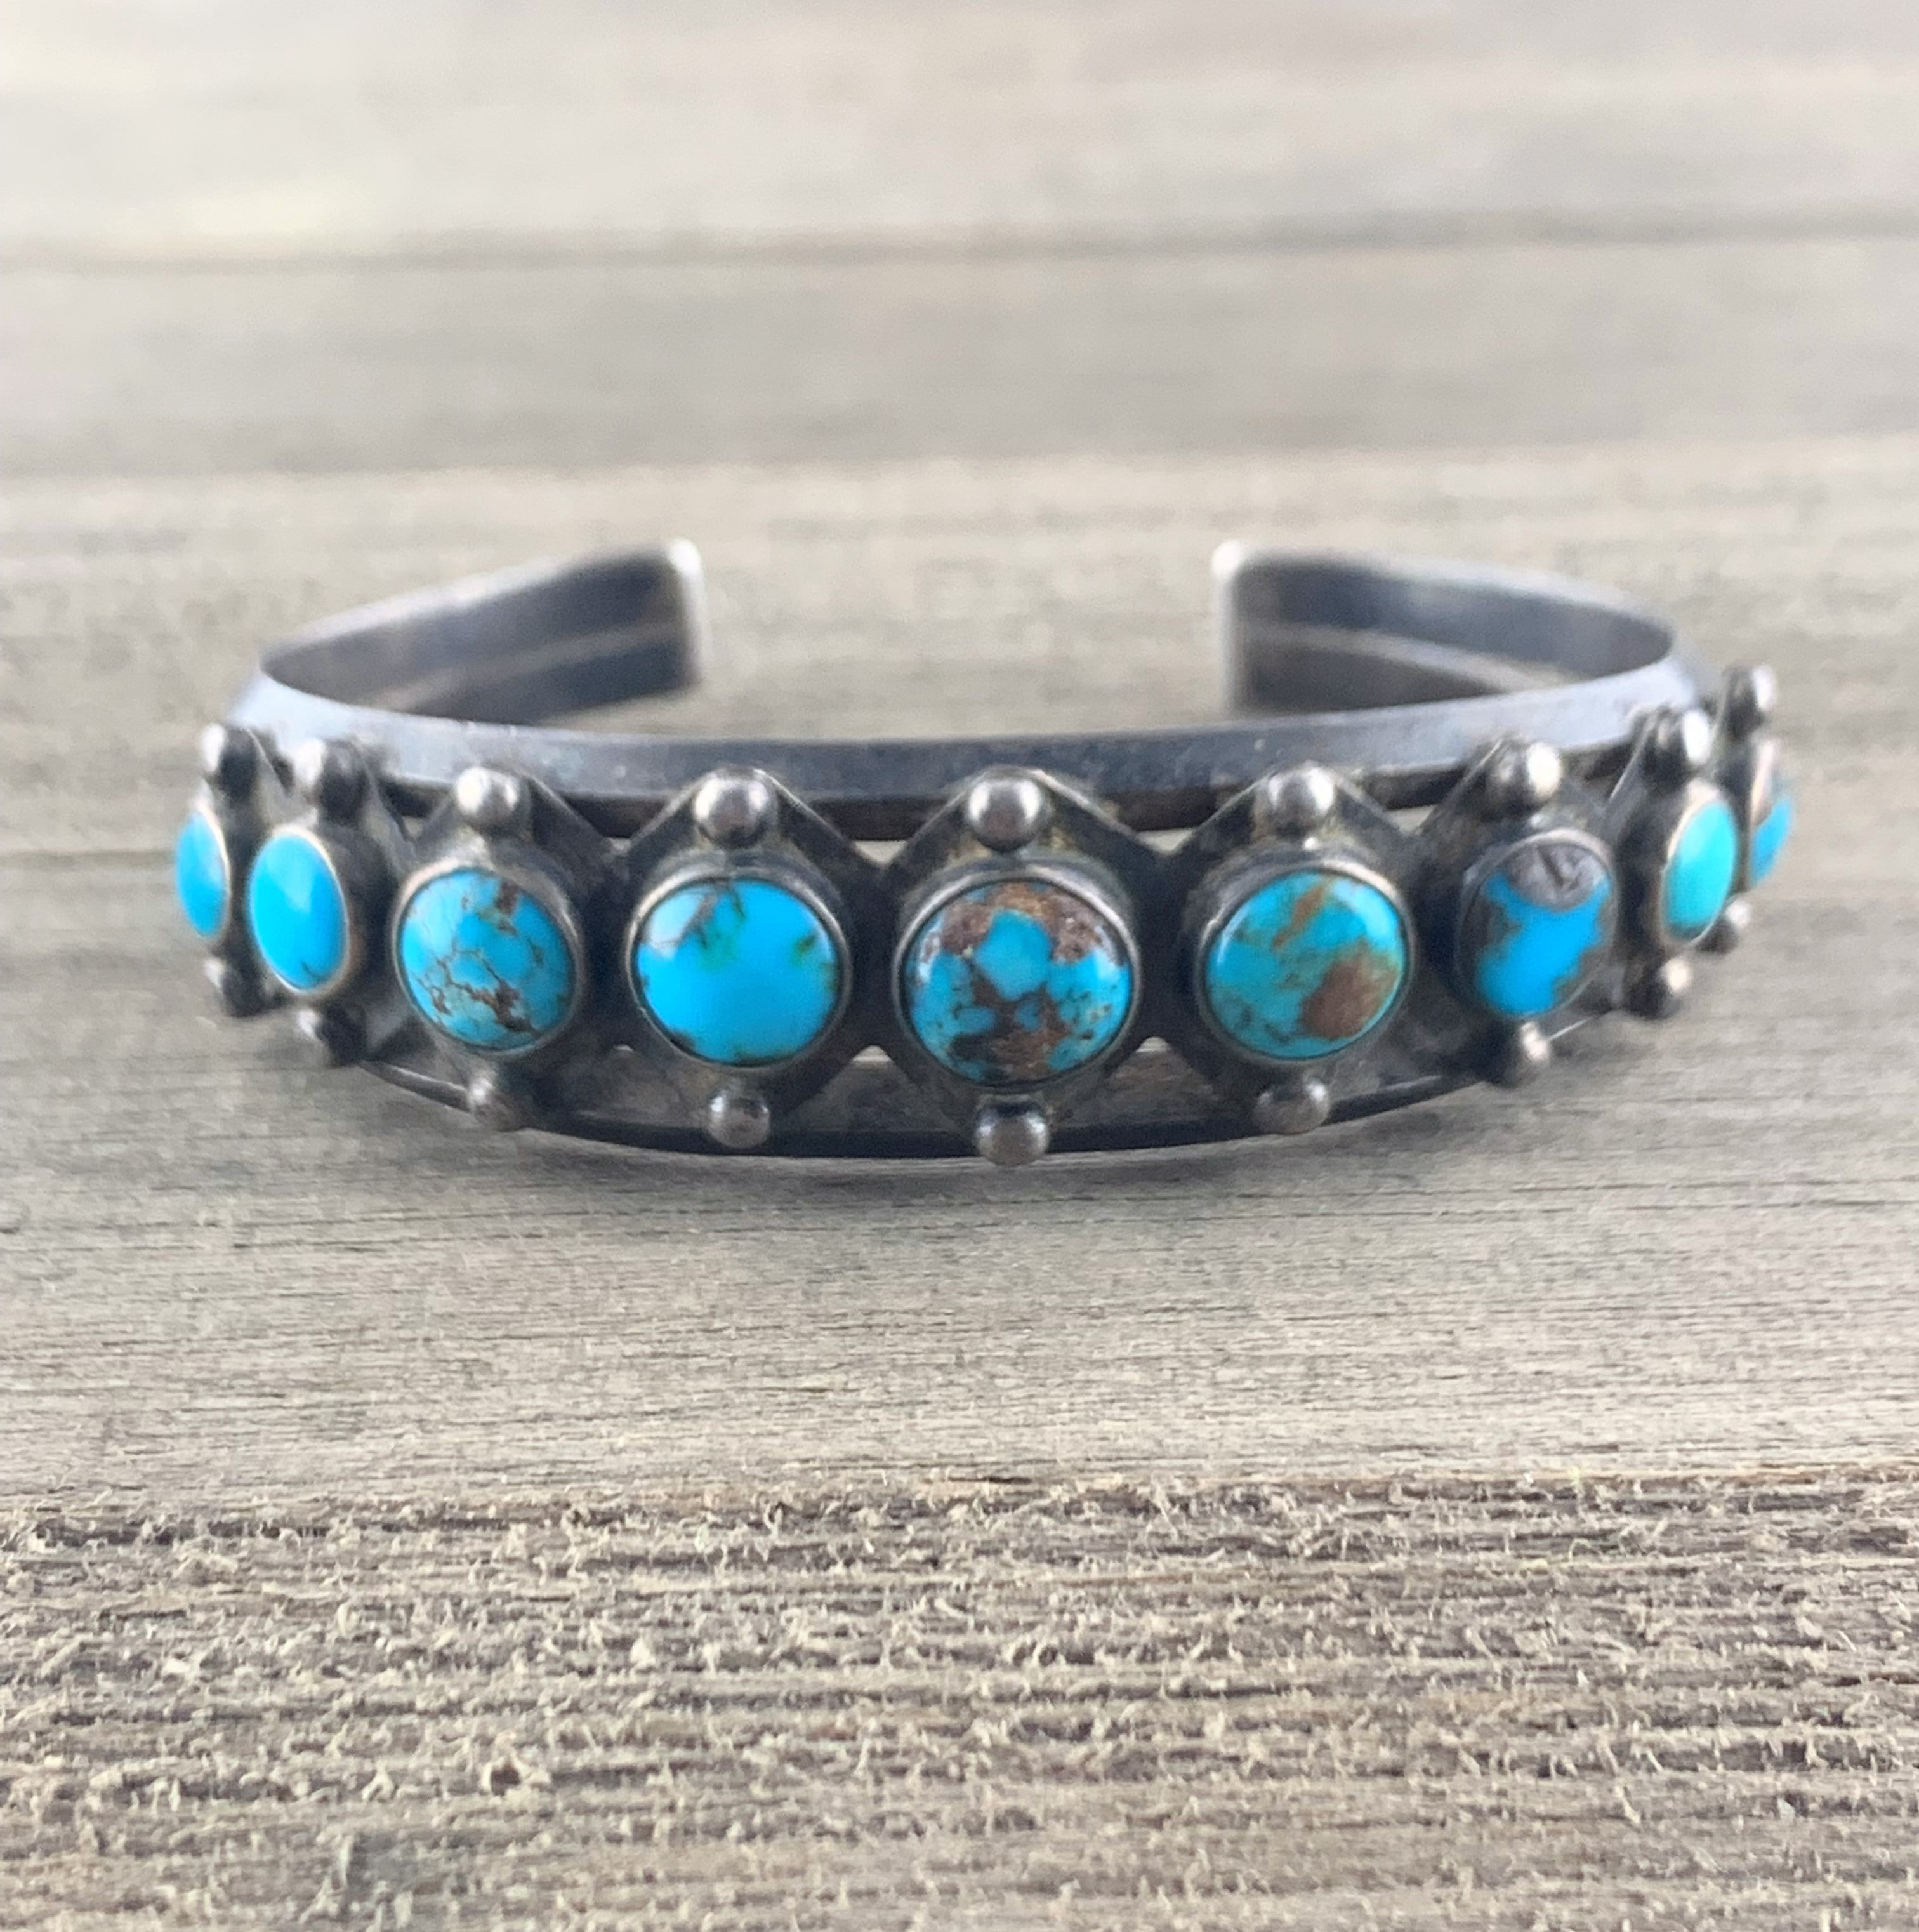 OLD PILOT MOUNTAIN TURQUOISE BRACELET – Custer Battlefield Trading Post  Company